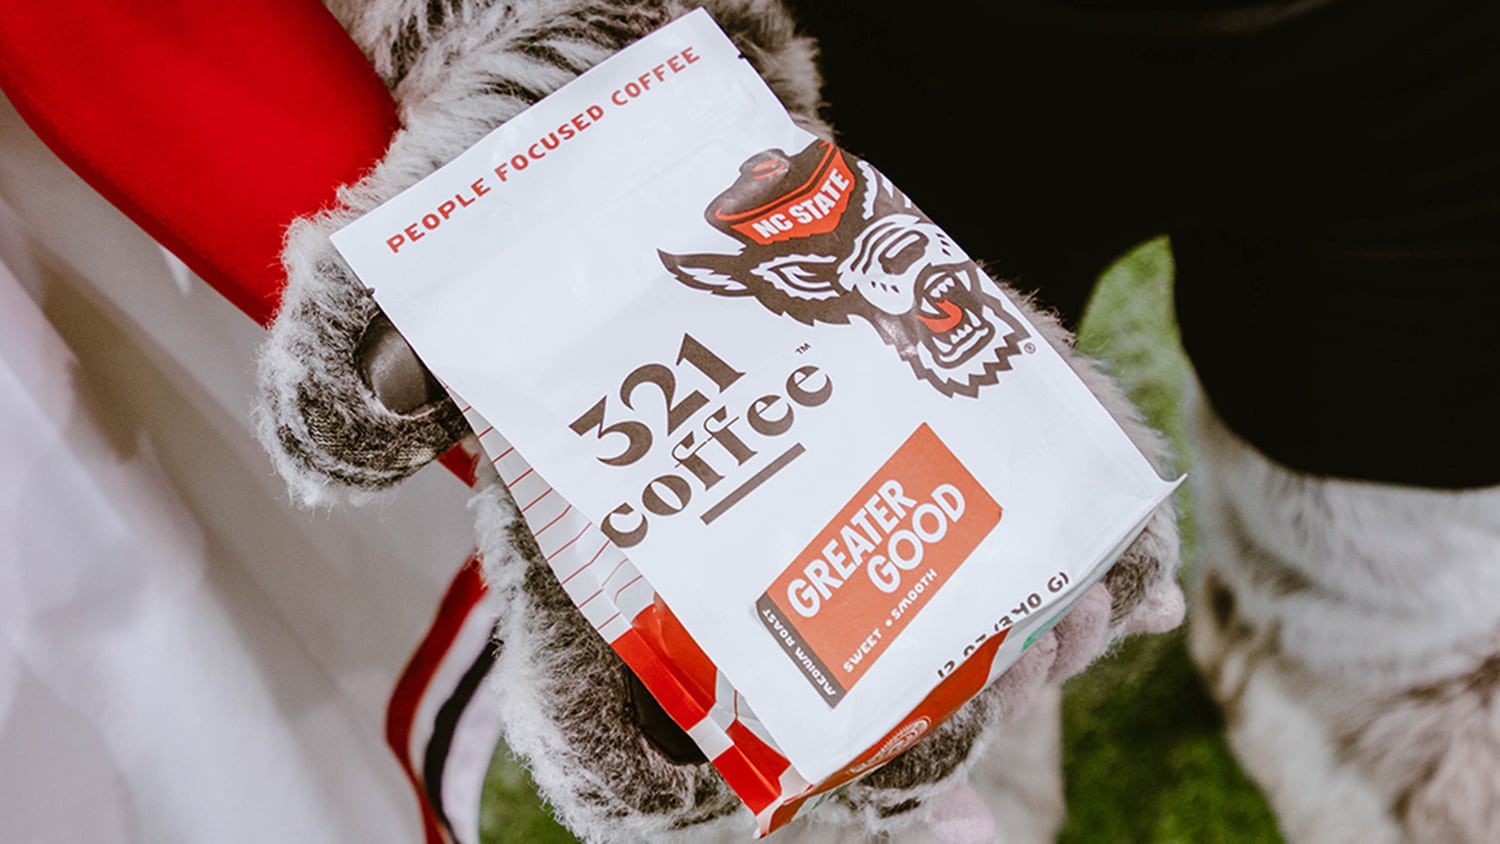 NC State and 321 Coffee are teaming up to launch a “Greater Good” blend featuring university co-branding. 